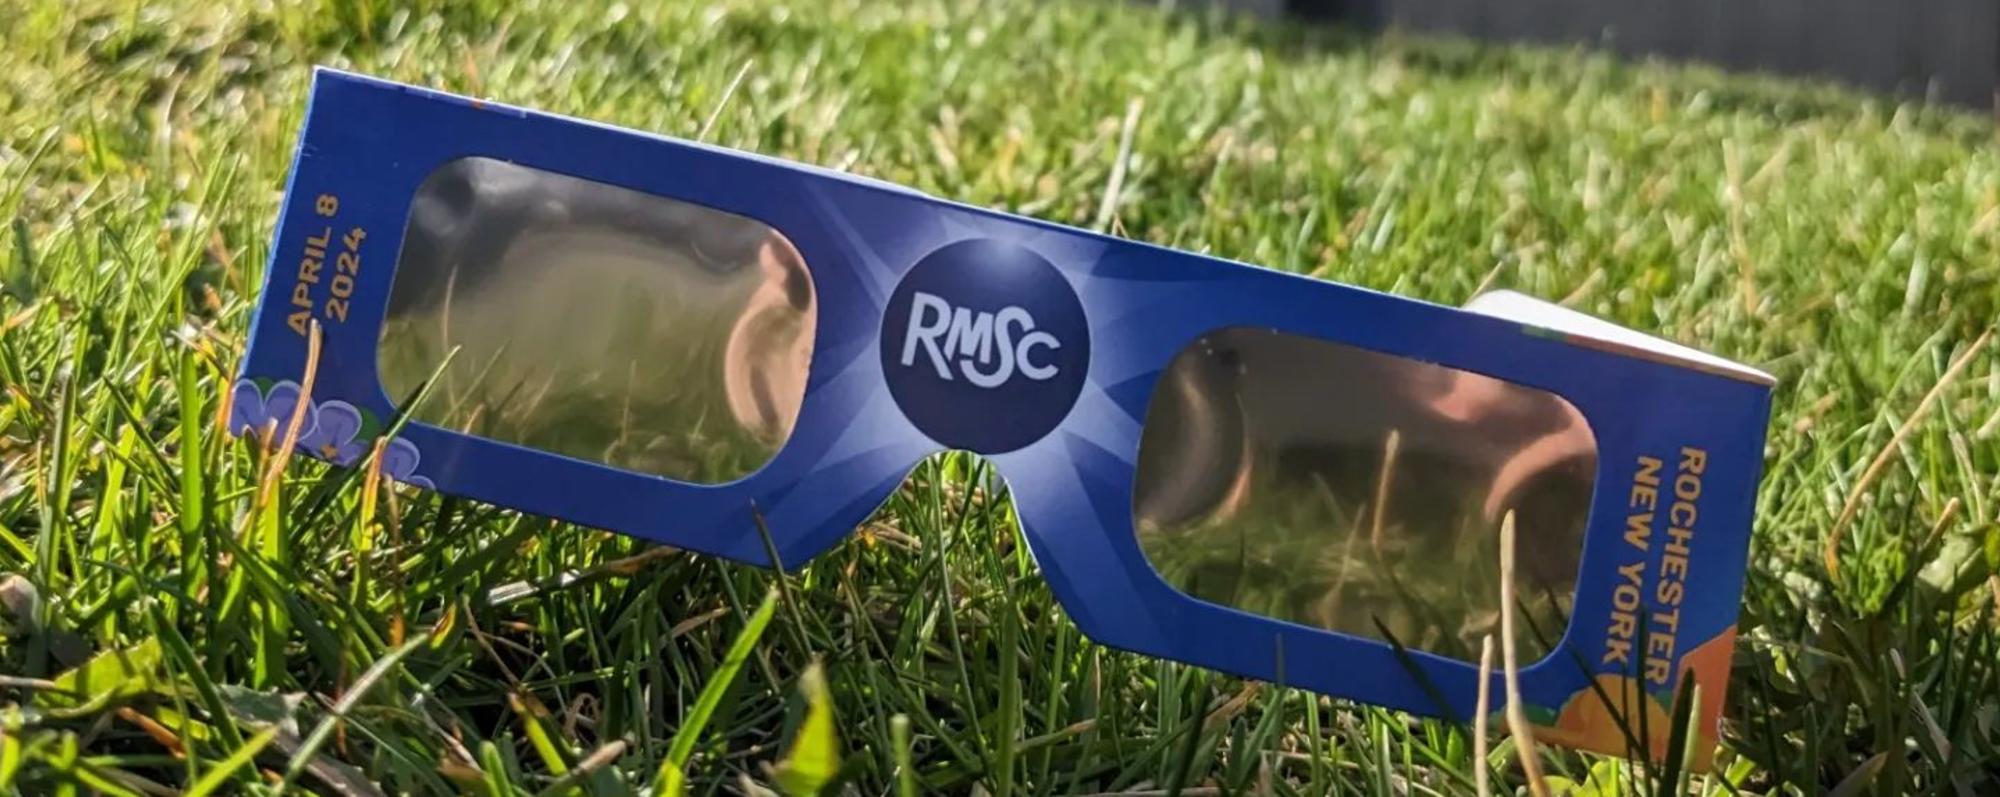 Eclipse viewing glasses on the lawn in front of the RMSC